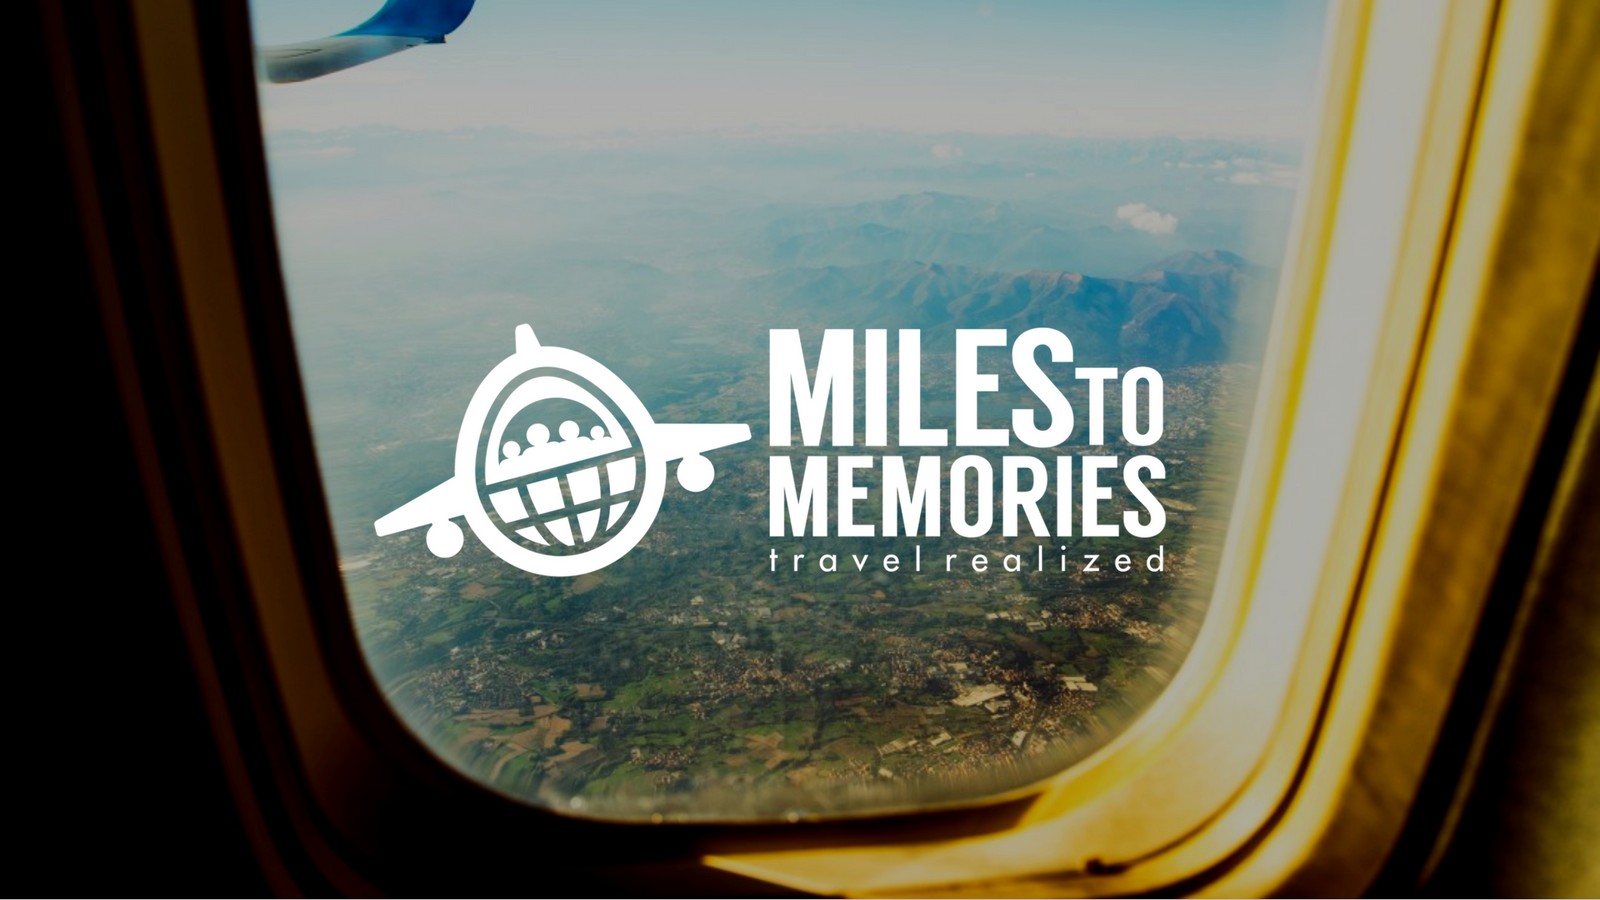 New Ways To Get More Miles to Memories